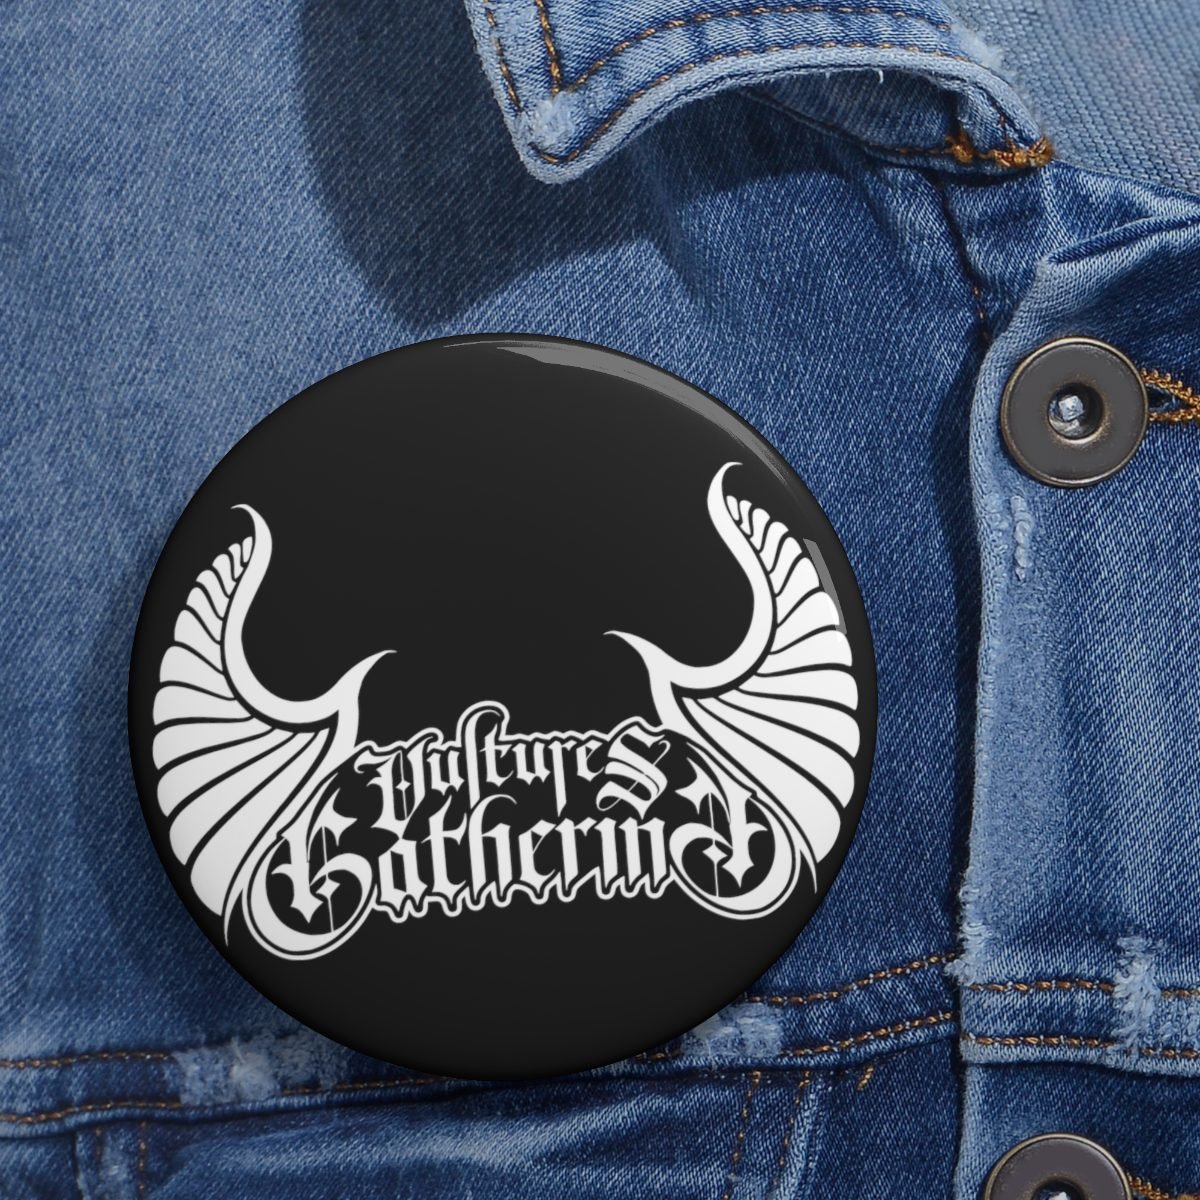 Vultures Gathering Pin Buttons